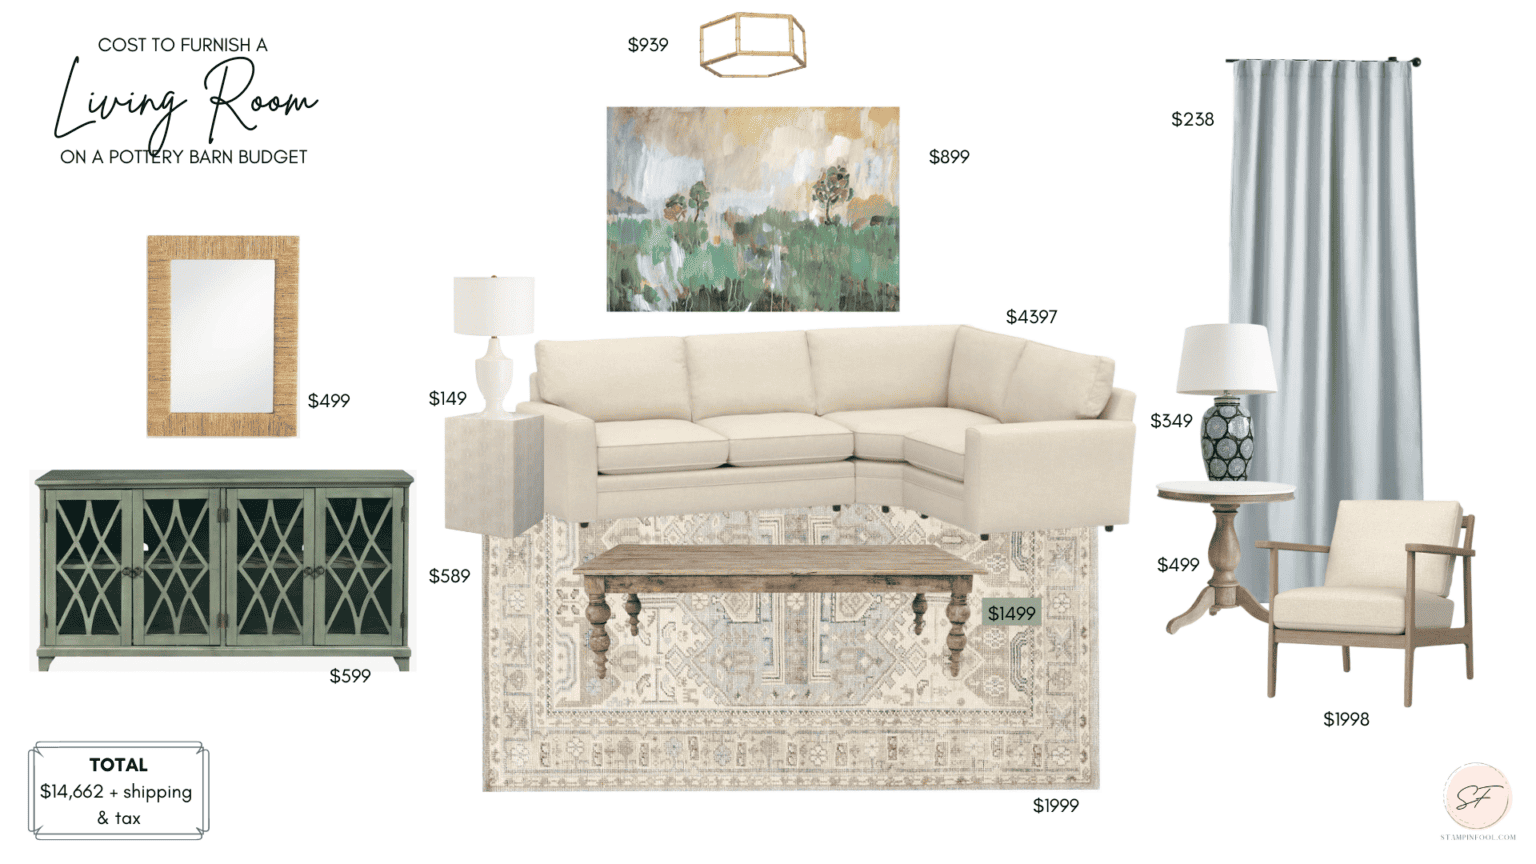 A image of various pieces of furniture and decor items with their prices, likely for a living room setting.